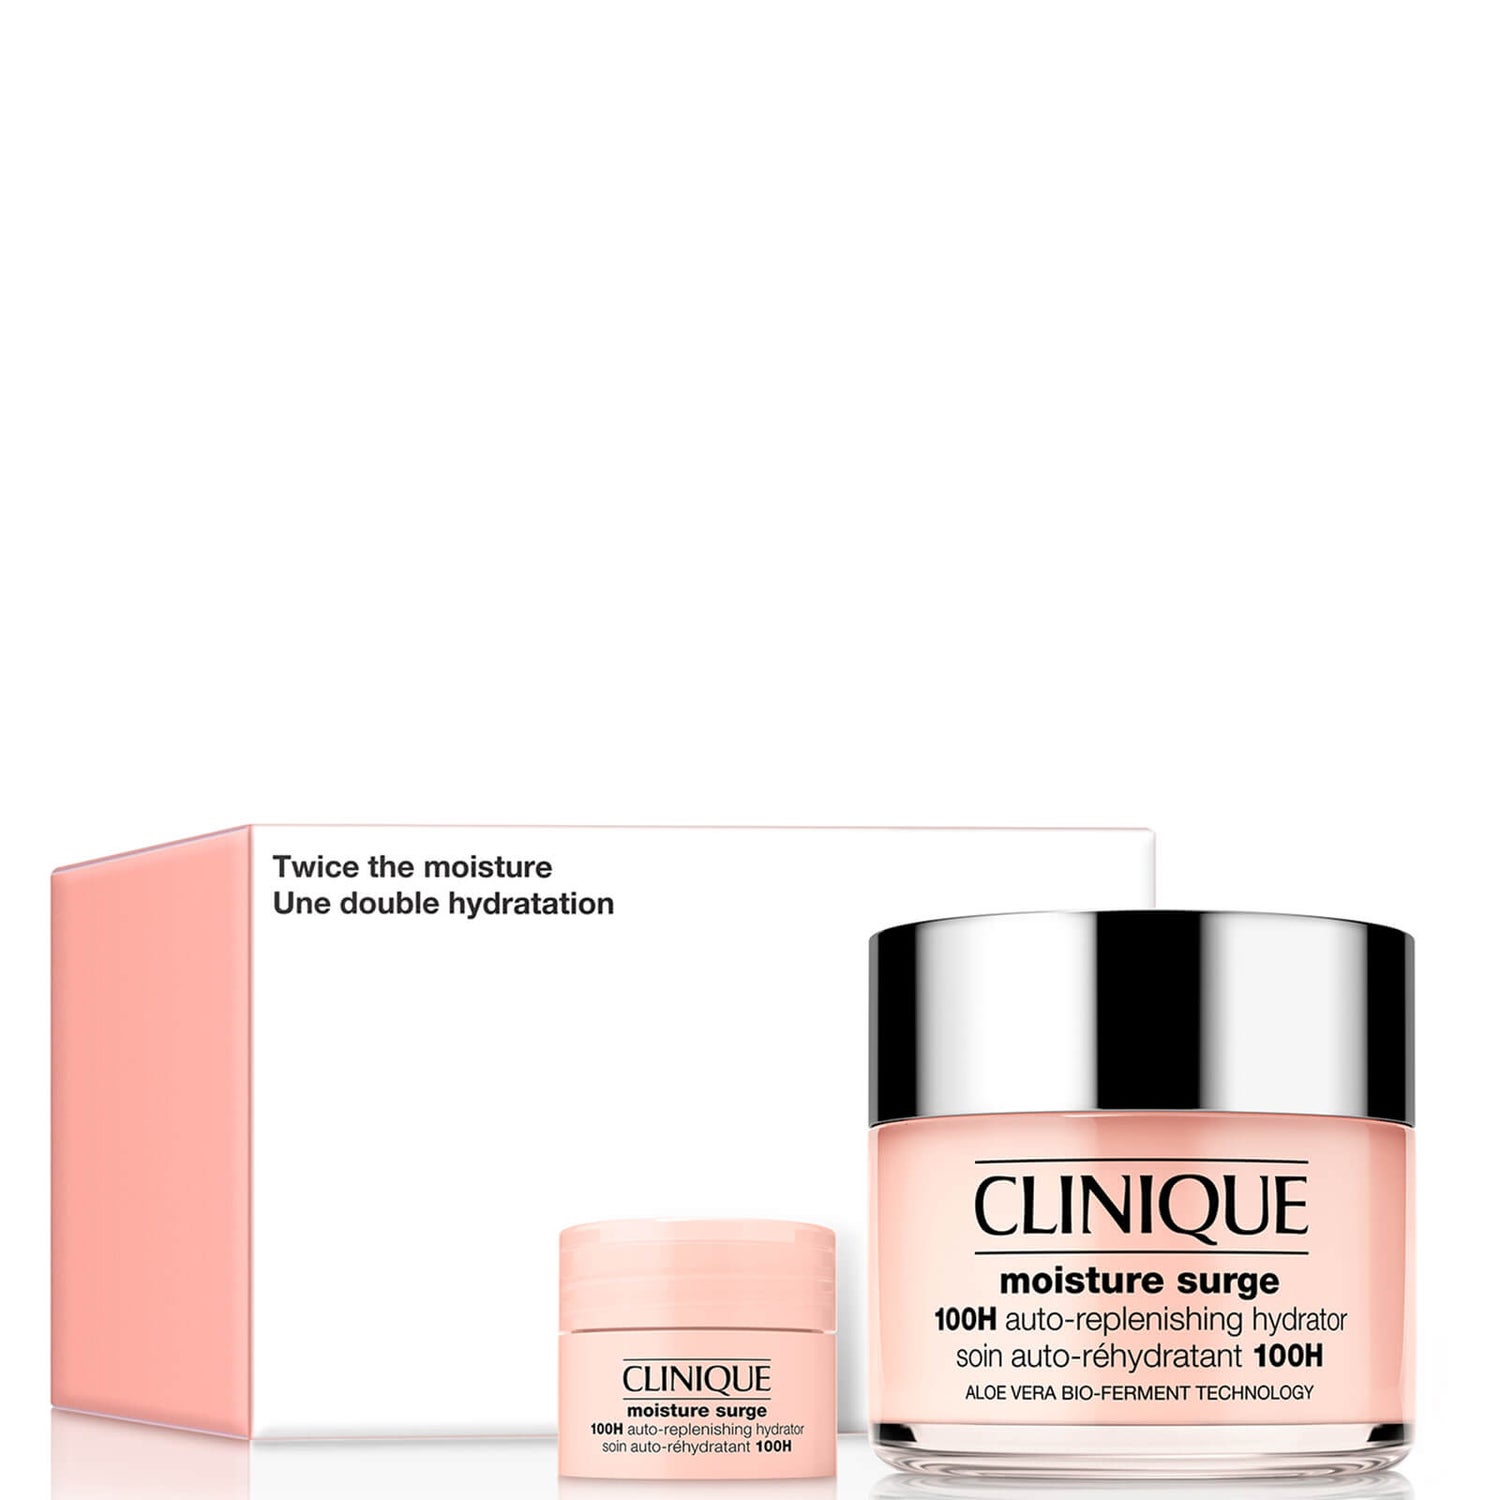 Clinique Twice the Moisture: Home and Away Skincare Gift Set (Worth £82.16)